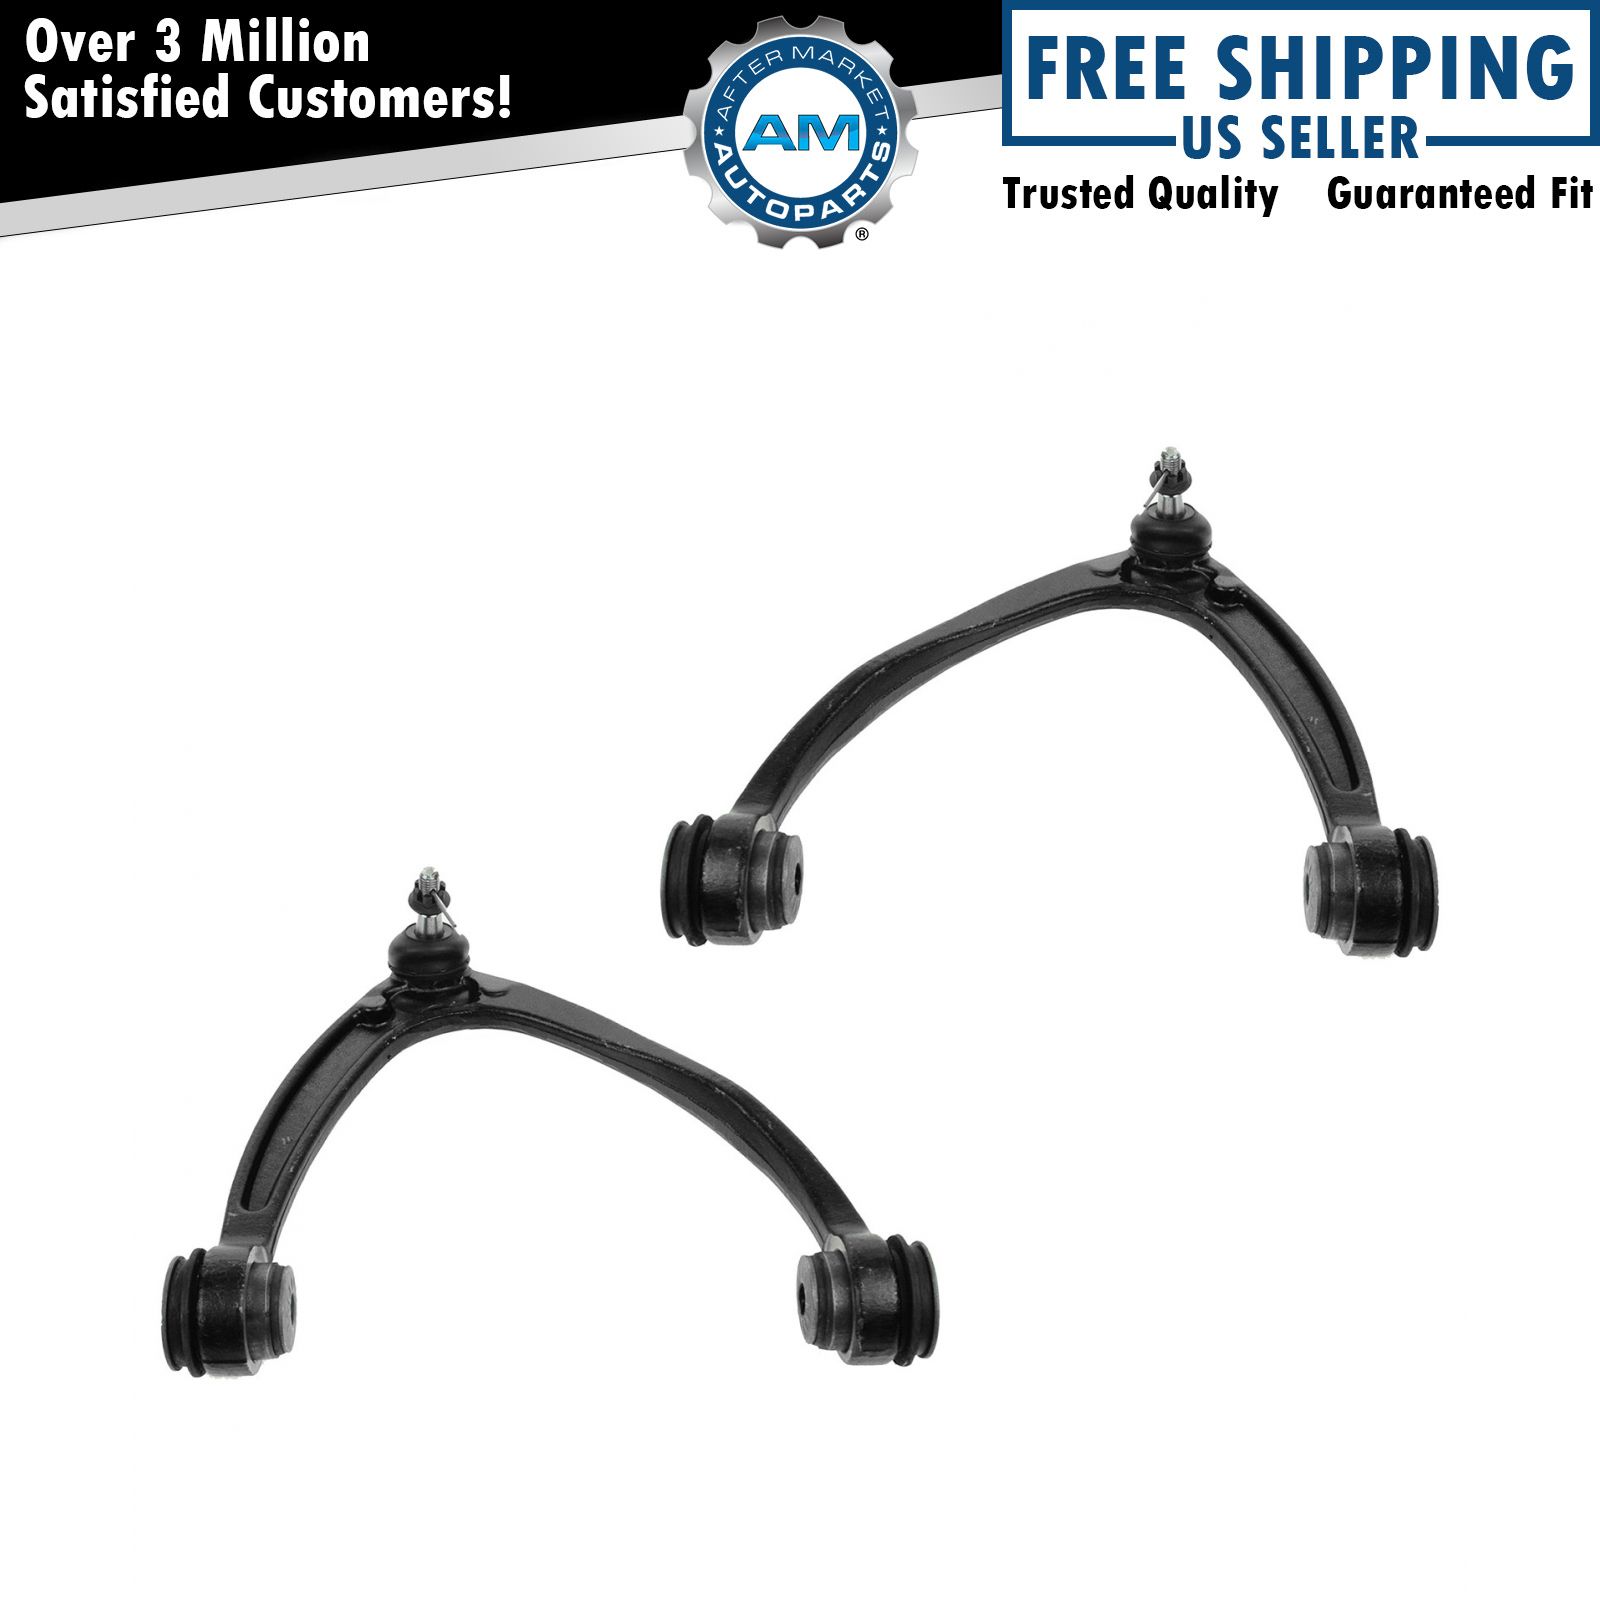 AC DELCO Front Upper Control Arms Ball Joints Pair Set for Chevy GMC Cadillac